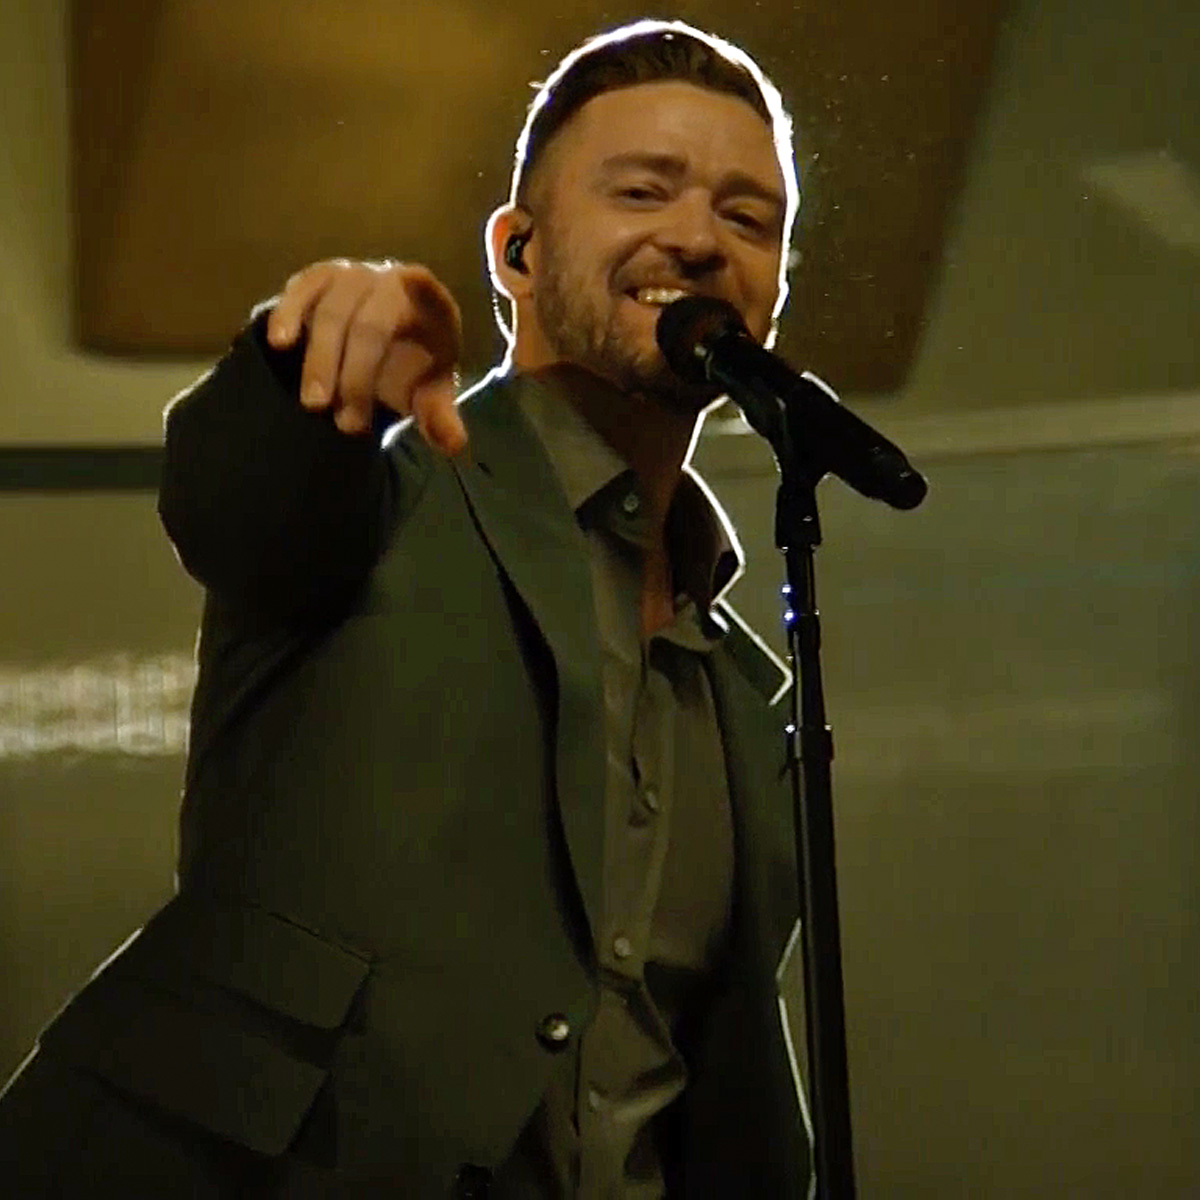 Justin Timberlake Promises Better Days With Inauguration Performance